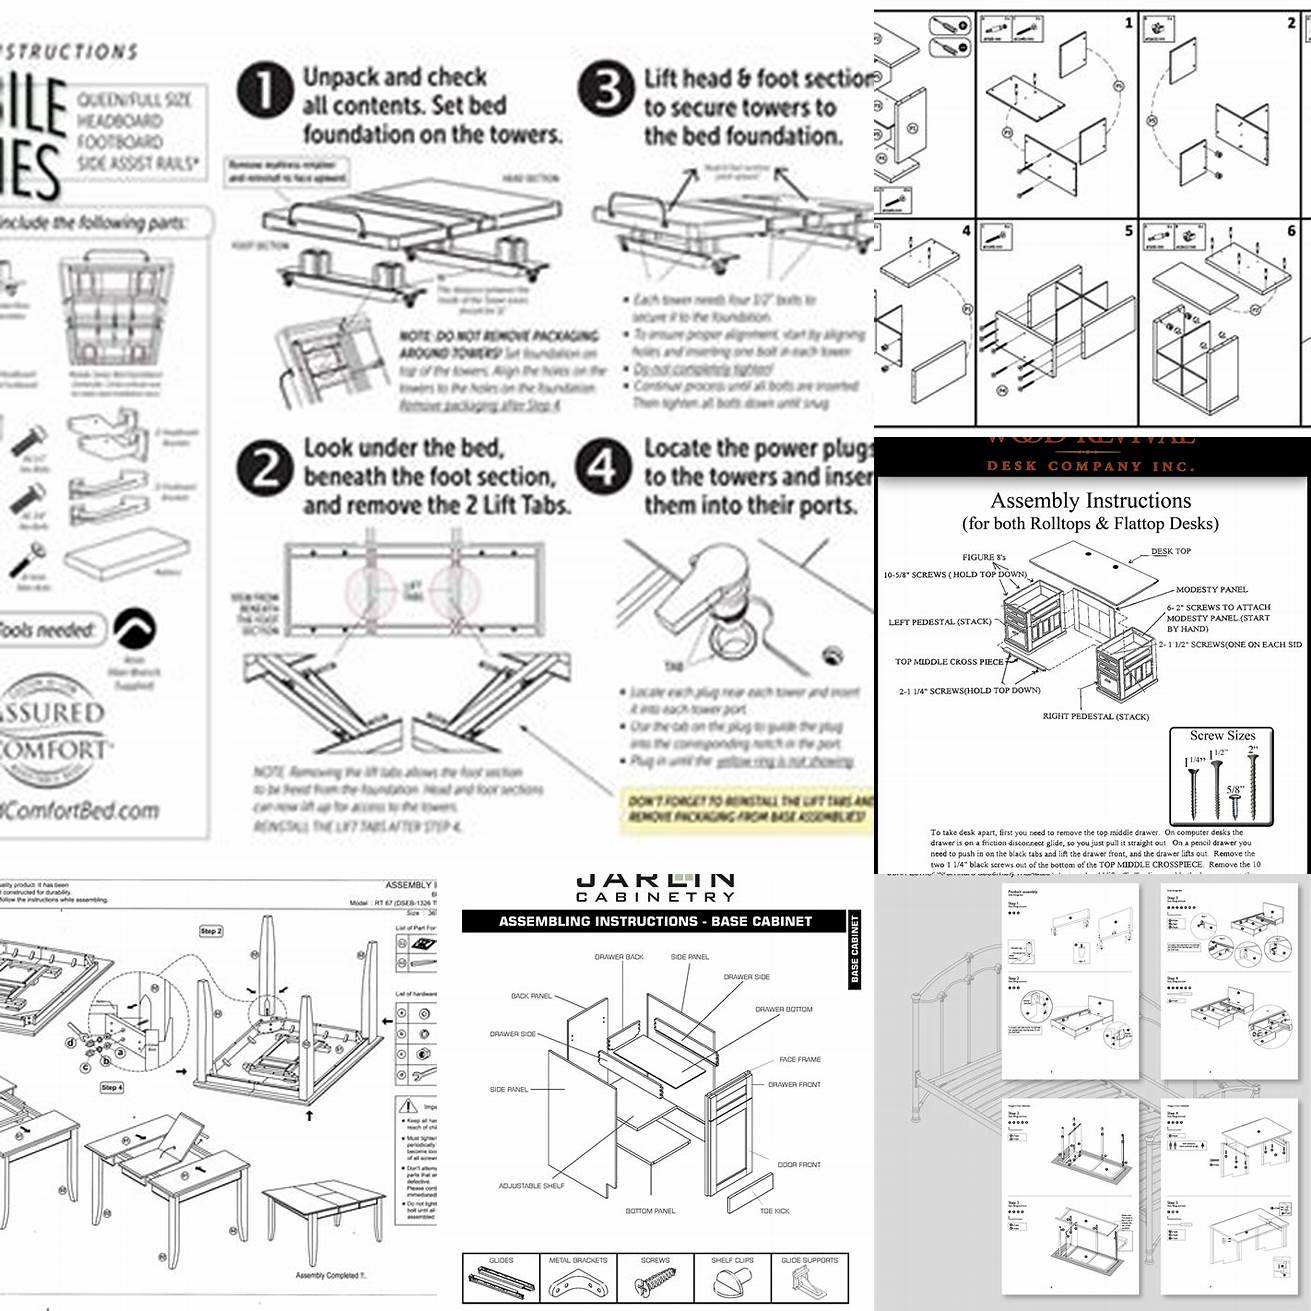 Image 4 Assembly instructions